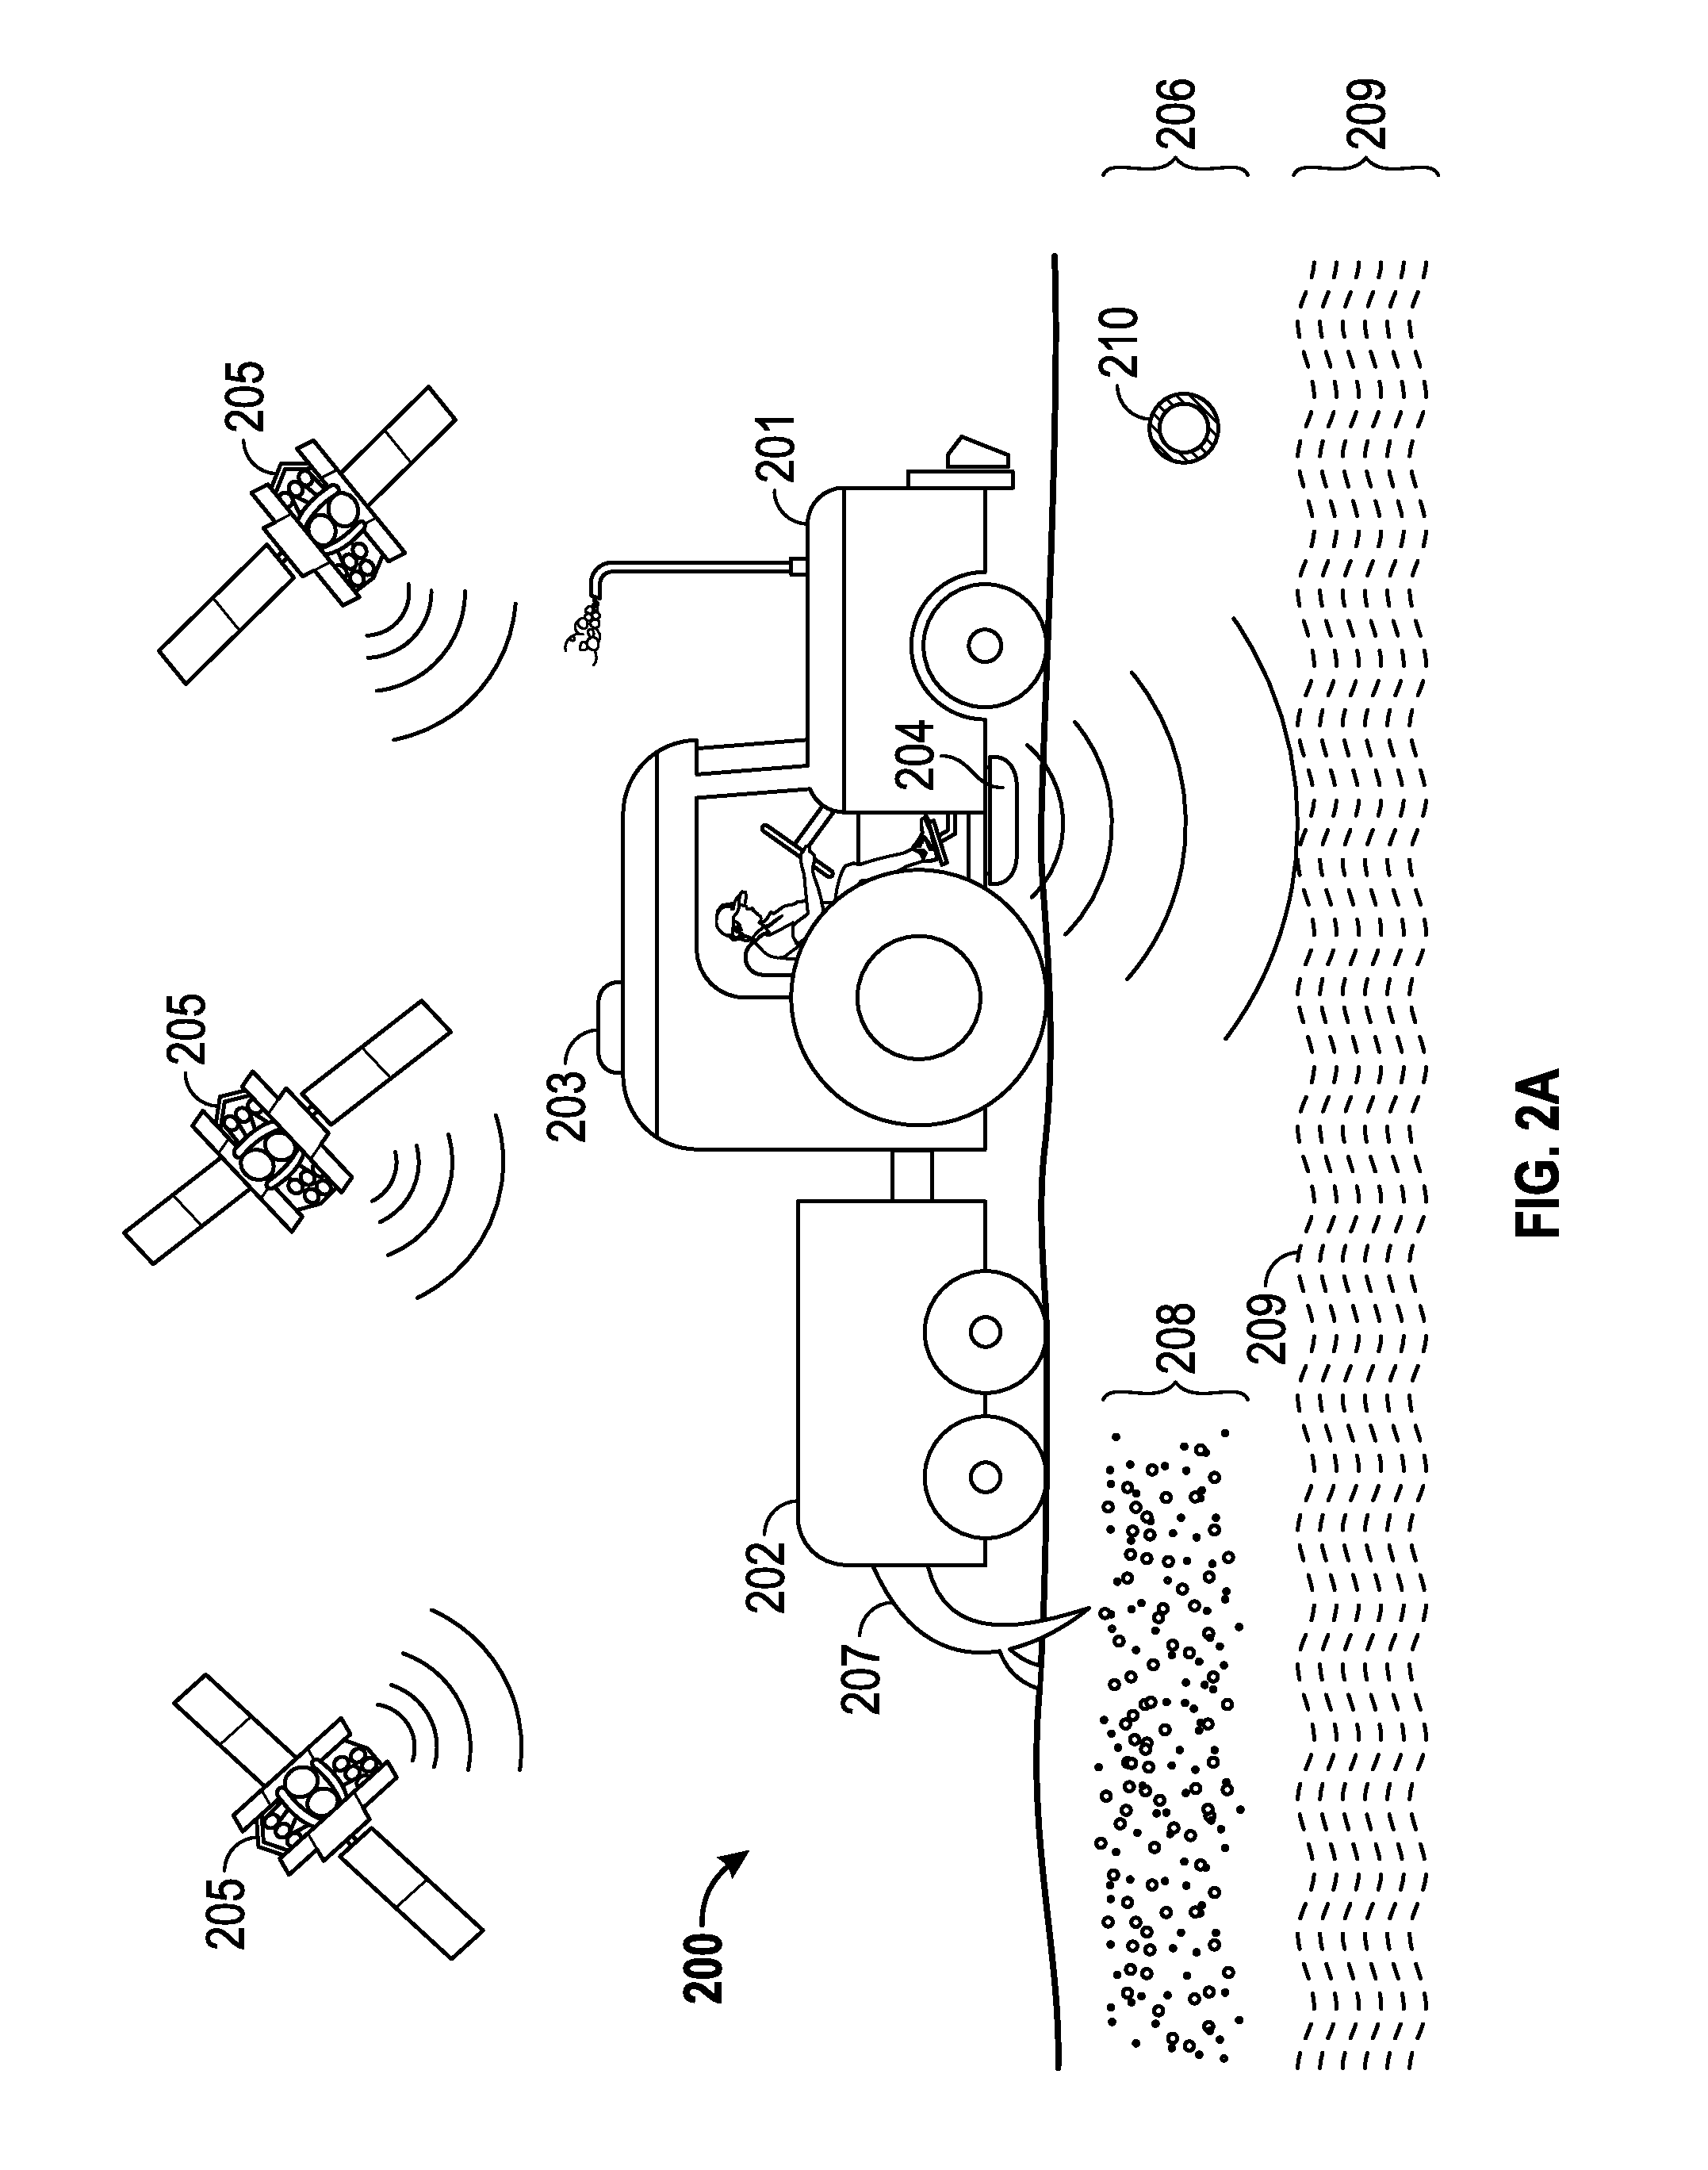 Systems and methods for detecting soil characteristics